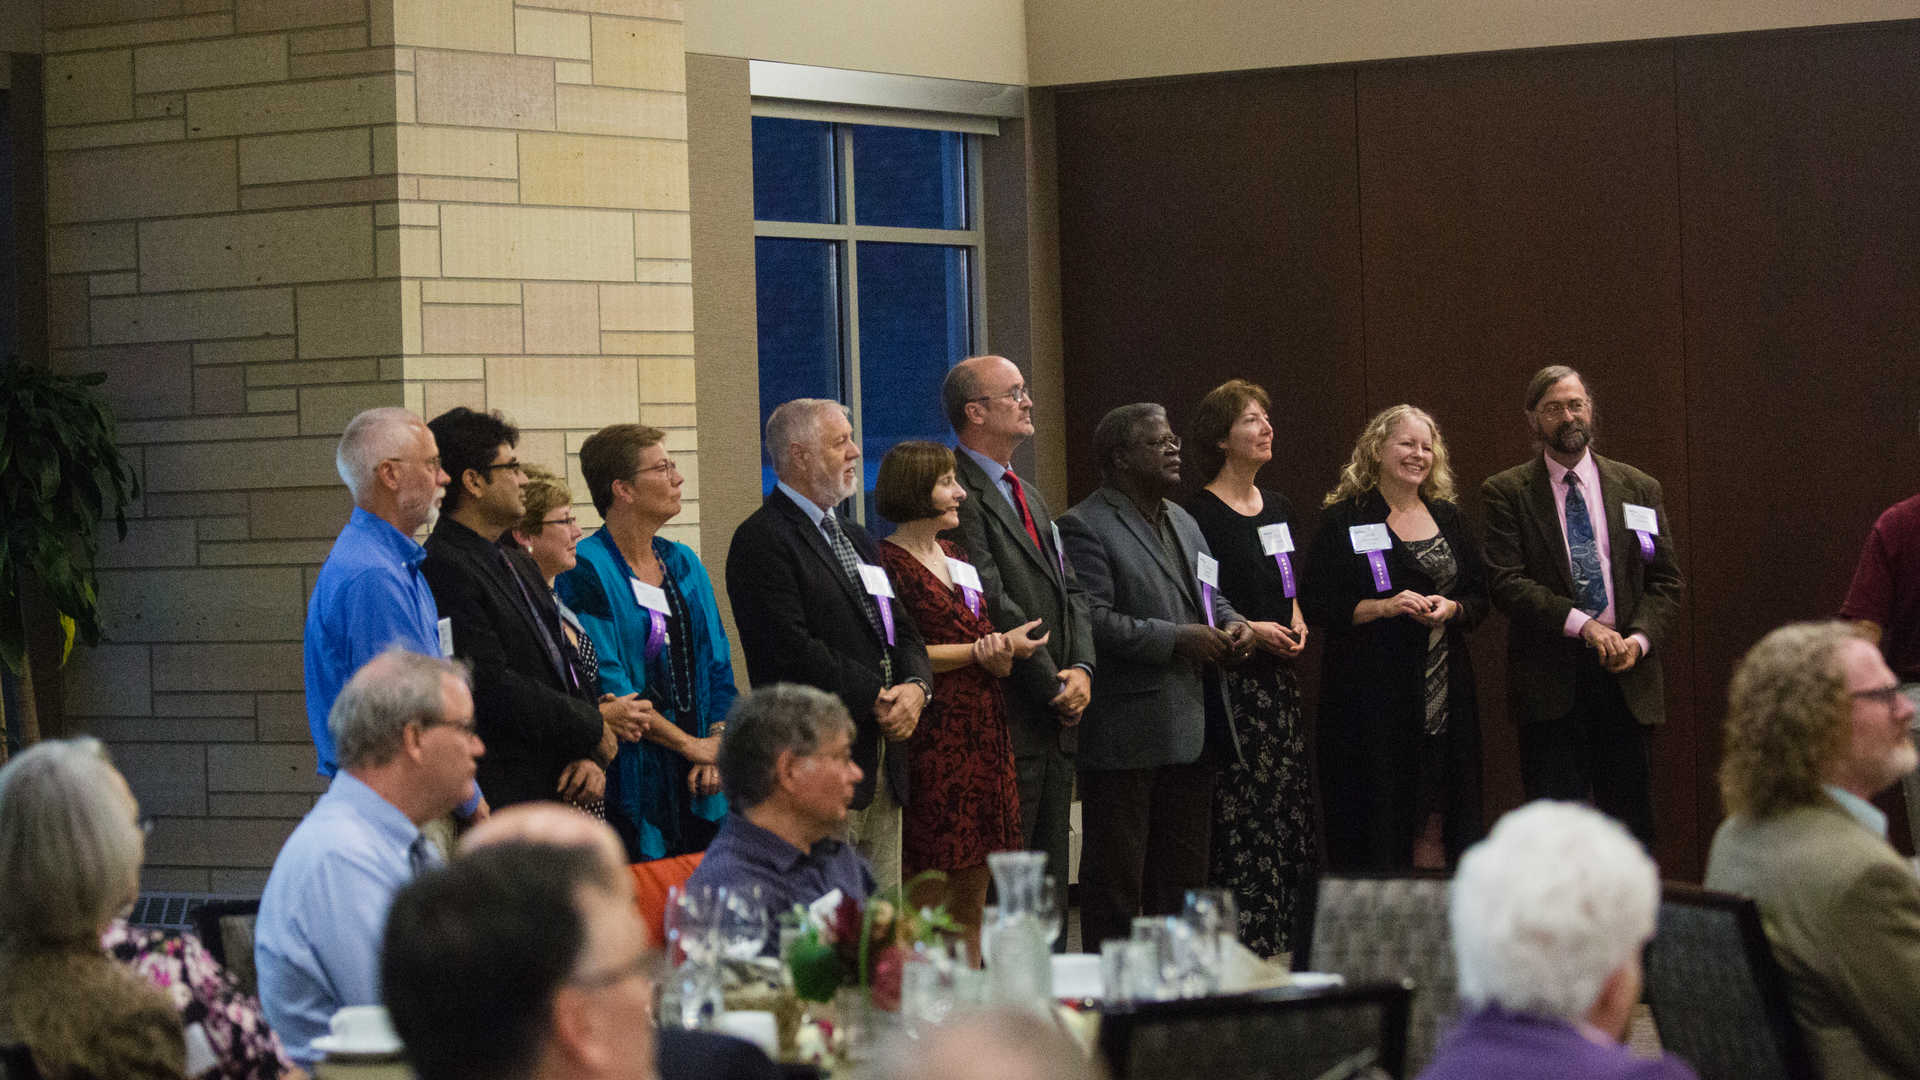 Faculty being honored during Faculty Dinner